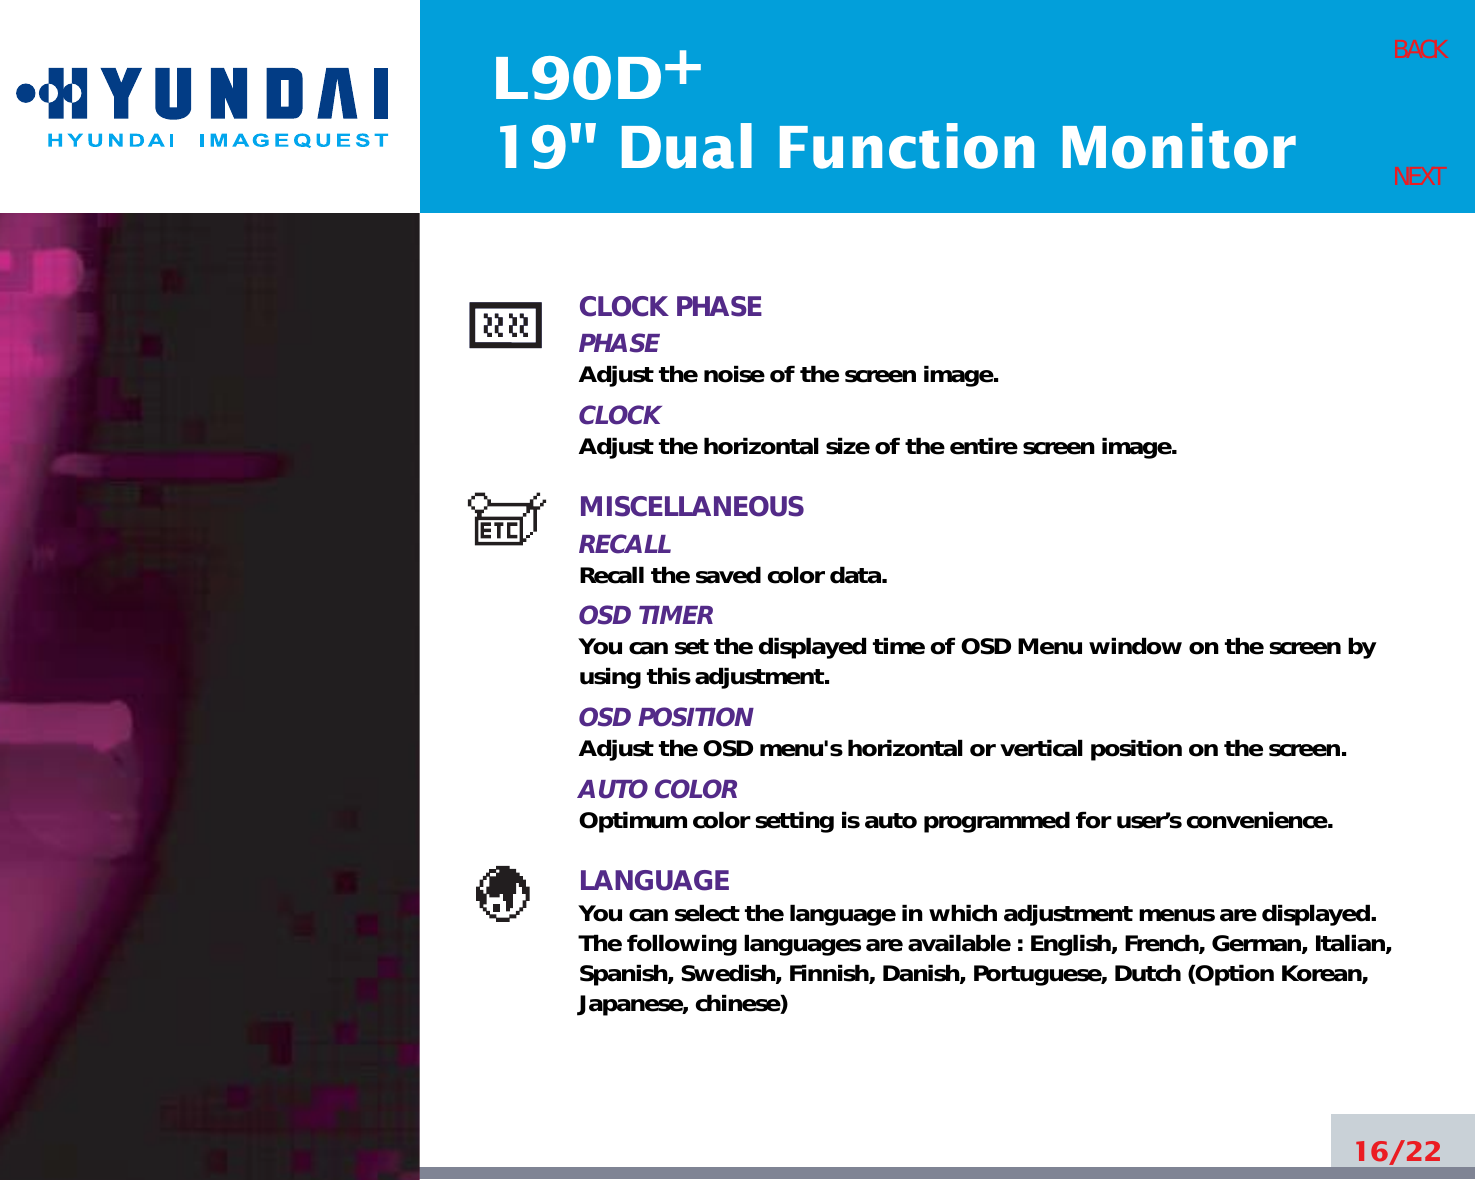 L90D19&quot; Dual Function Monitor+16/22BACKNEXTCLOCK PHASEPHASEAdjust the noise of the screen image.CLOCKAdjust the horizontal size of the entire screen image.MISCELLANEOUSRECALL Recall the saved color data.OSD TIMERYou can set the displayed time of OSD Menu window on the screen byusing this adjustment.OSD POSITIONAdjust the OSD menu&apos;s horizontal or vertical position on the screen.AUTO COLOROptimum color setting is auto programmed for user’s convenience.LANGUAGEYou can select the language in which adjustment menus are displayed.The following languages are available : English, French, German, Italian,Spanish, Swedish, Finnish, Danish, Portuguese, Dutch (Option Korean,Japanese, chinese)